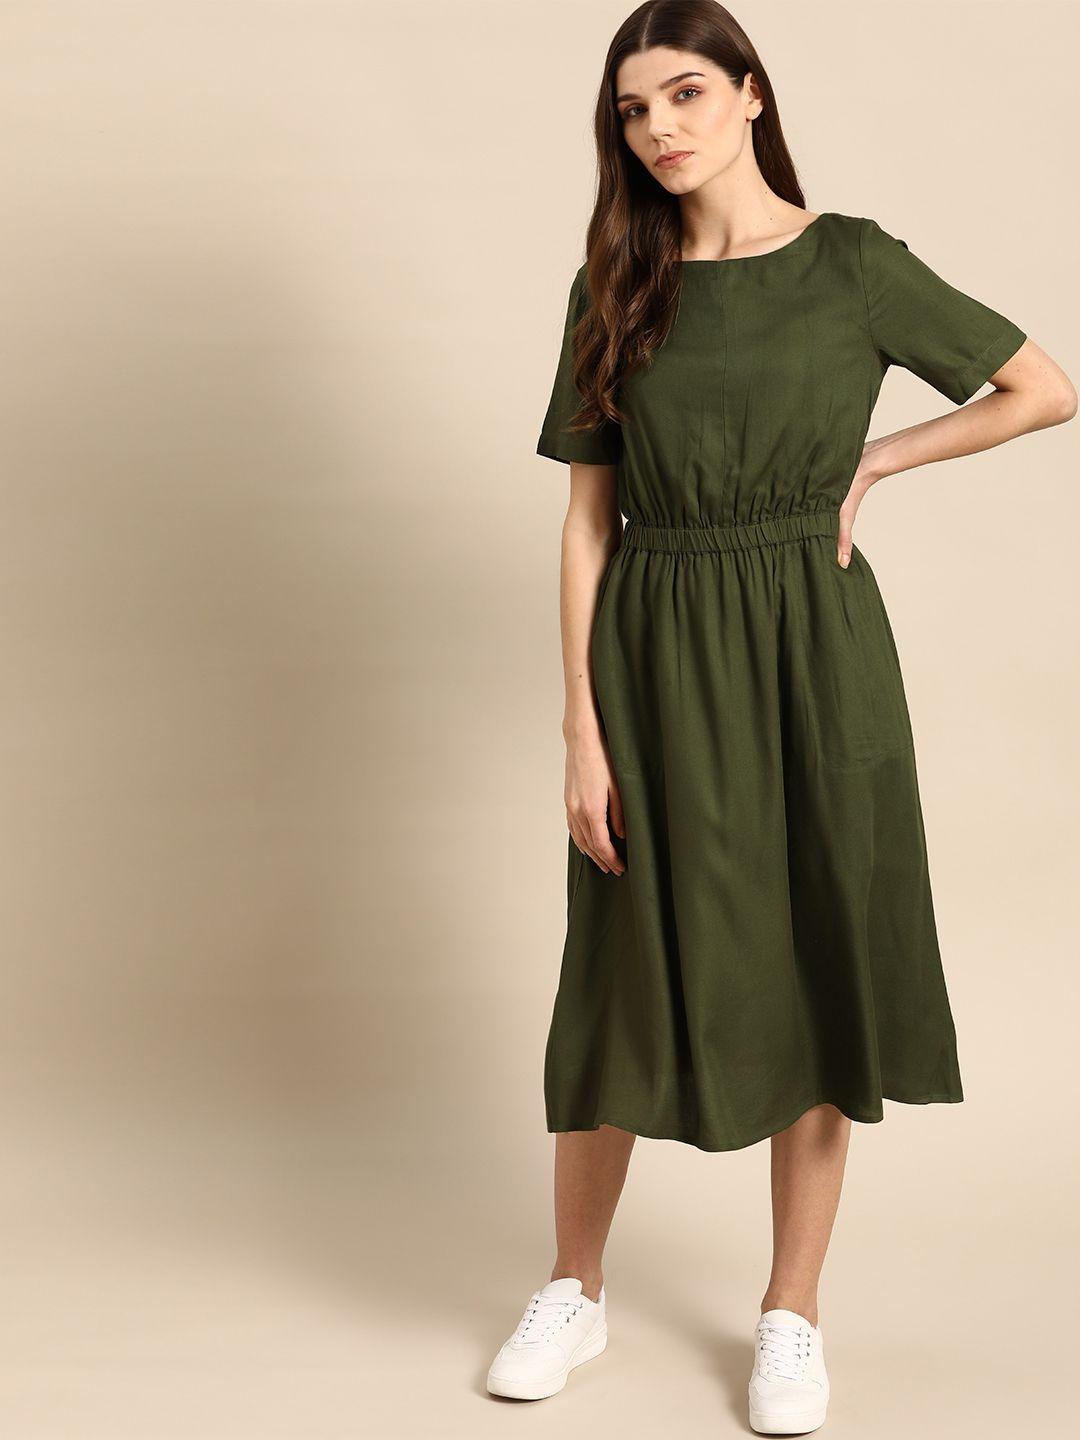 ether women olive green solid a-line dress